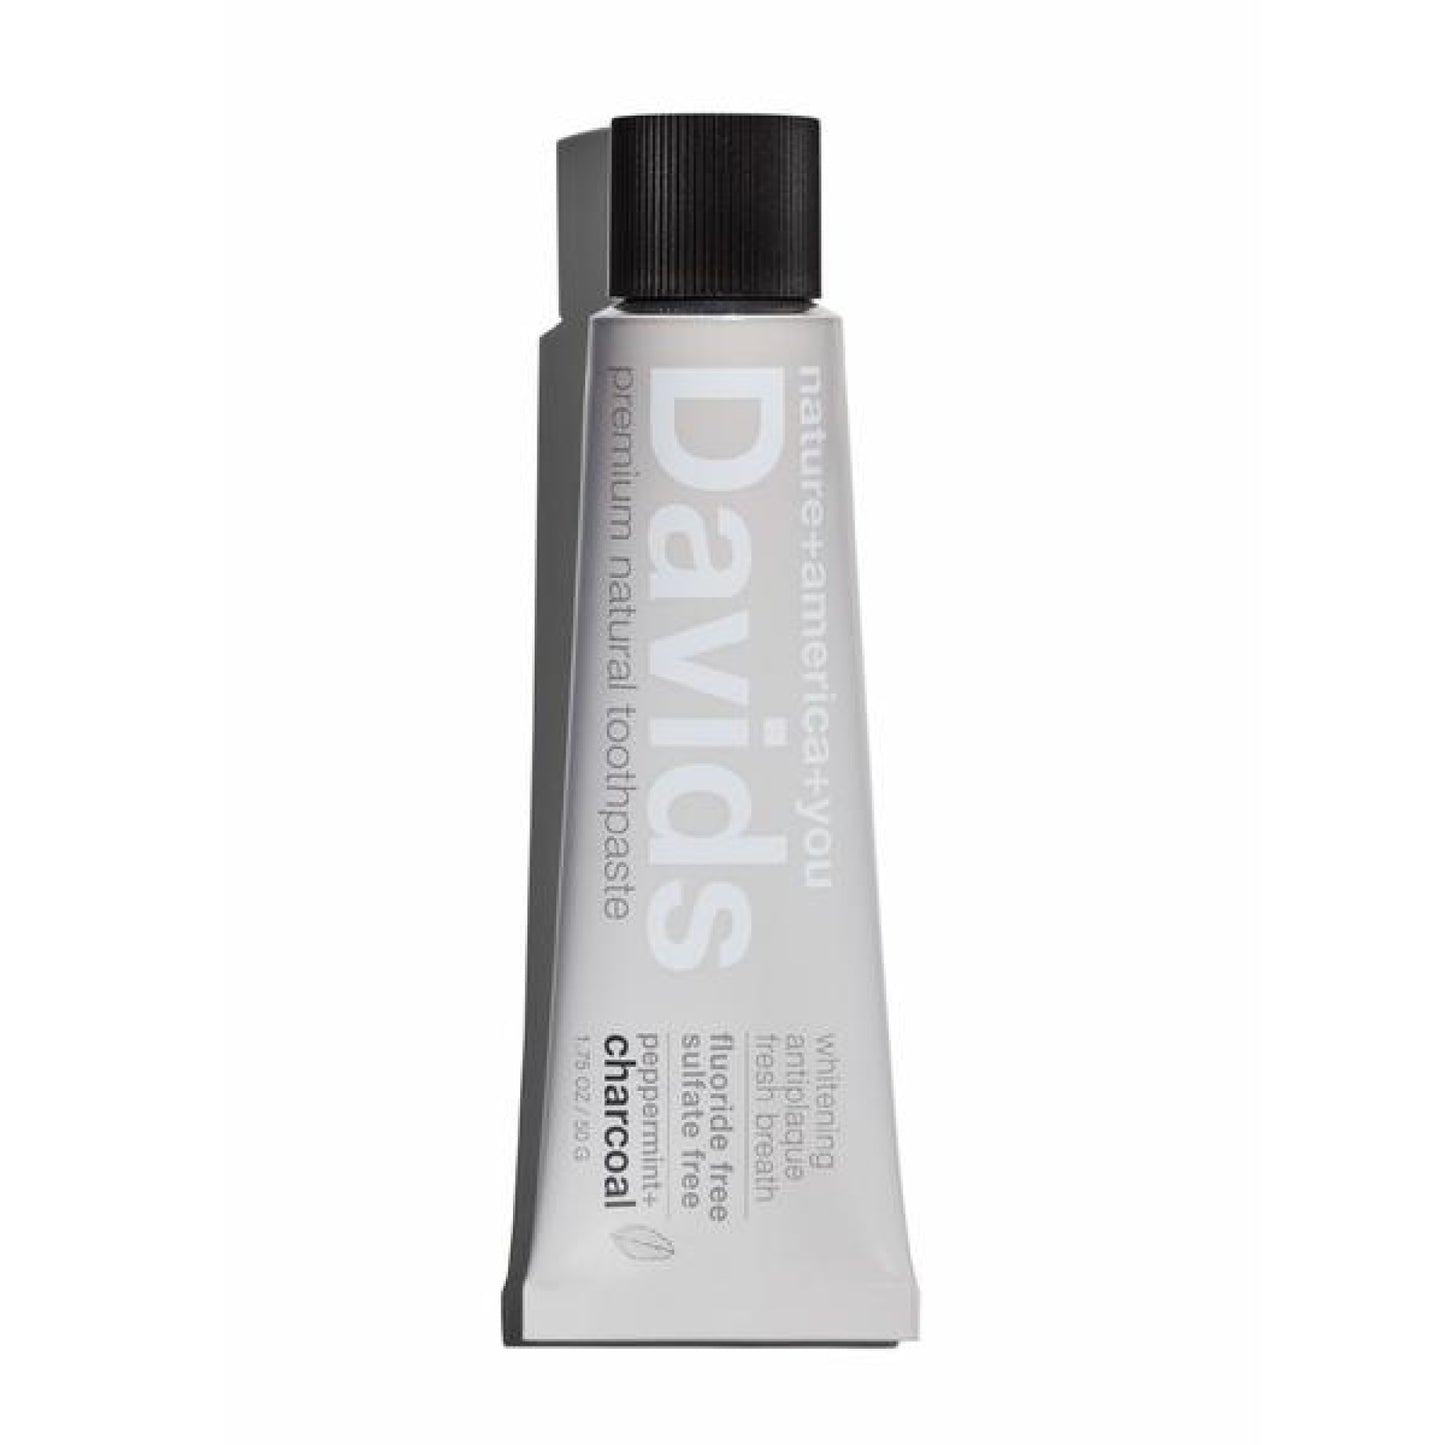 Davids Charcoal Peppermint Natural Toothpaste - Travel Size (1.75 oz) #10083601